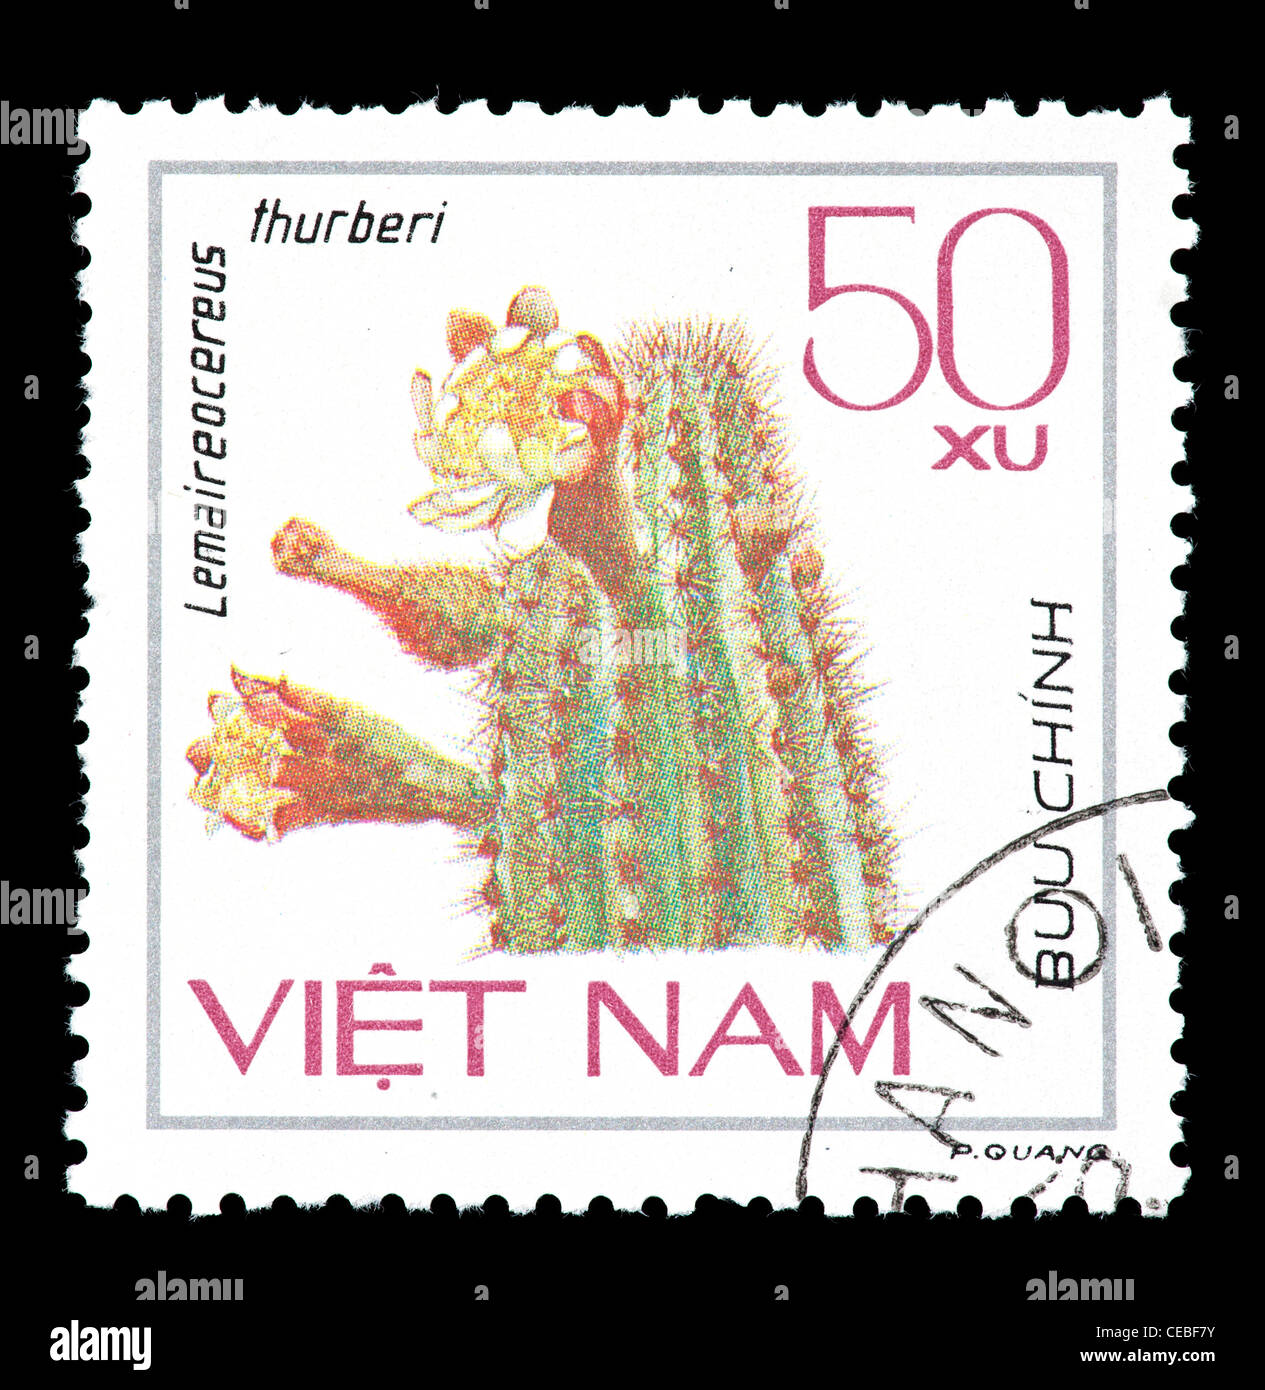 Postage stamp from Vietnam depicting a flowering cactus (Lemaireocereus thurberi) Stock Photo